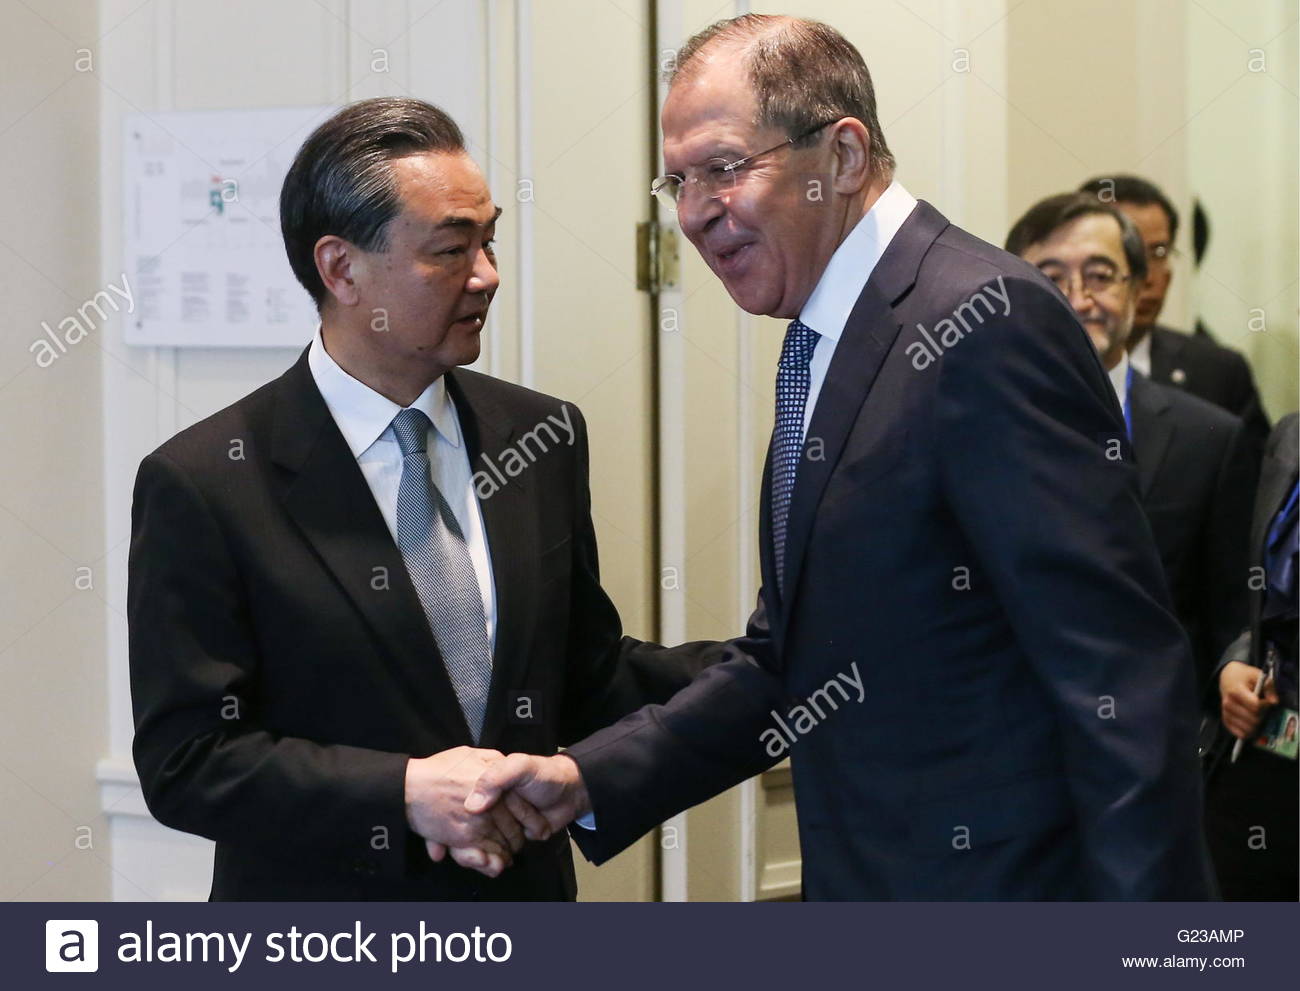 chinas-foreign-minister-wang-yi-and-russias-foreign-minister-sergei-G23AMP.jpg